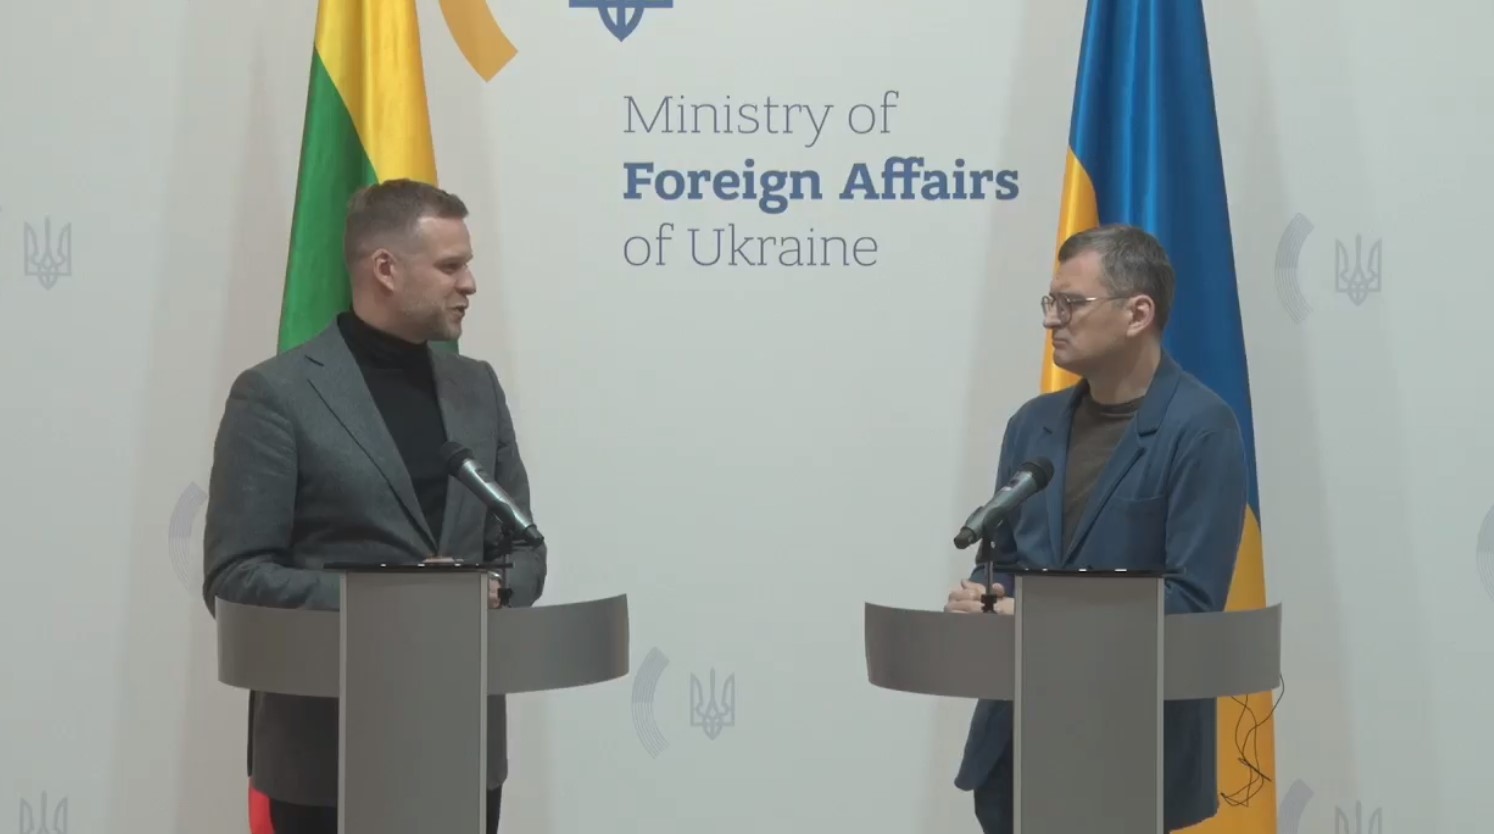 Ukraine's Foreign Minister Dmytro Kuleba and the head of the Ministry of Foreign Affairs of Lithuania discussed joint drone production